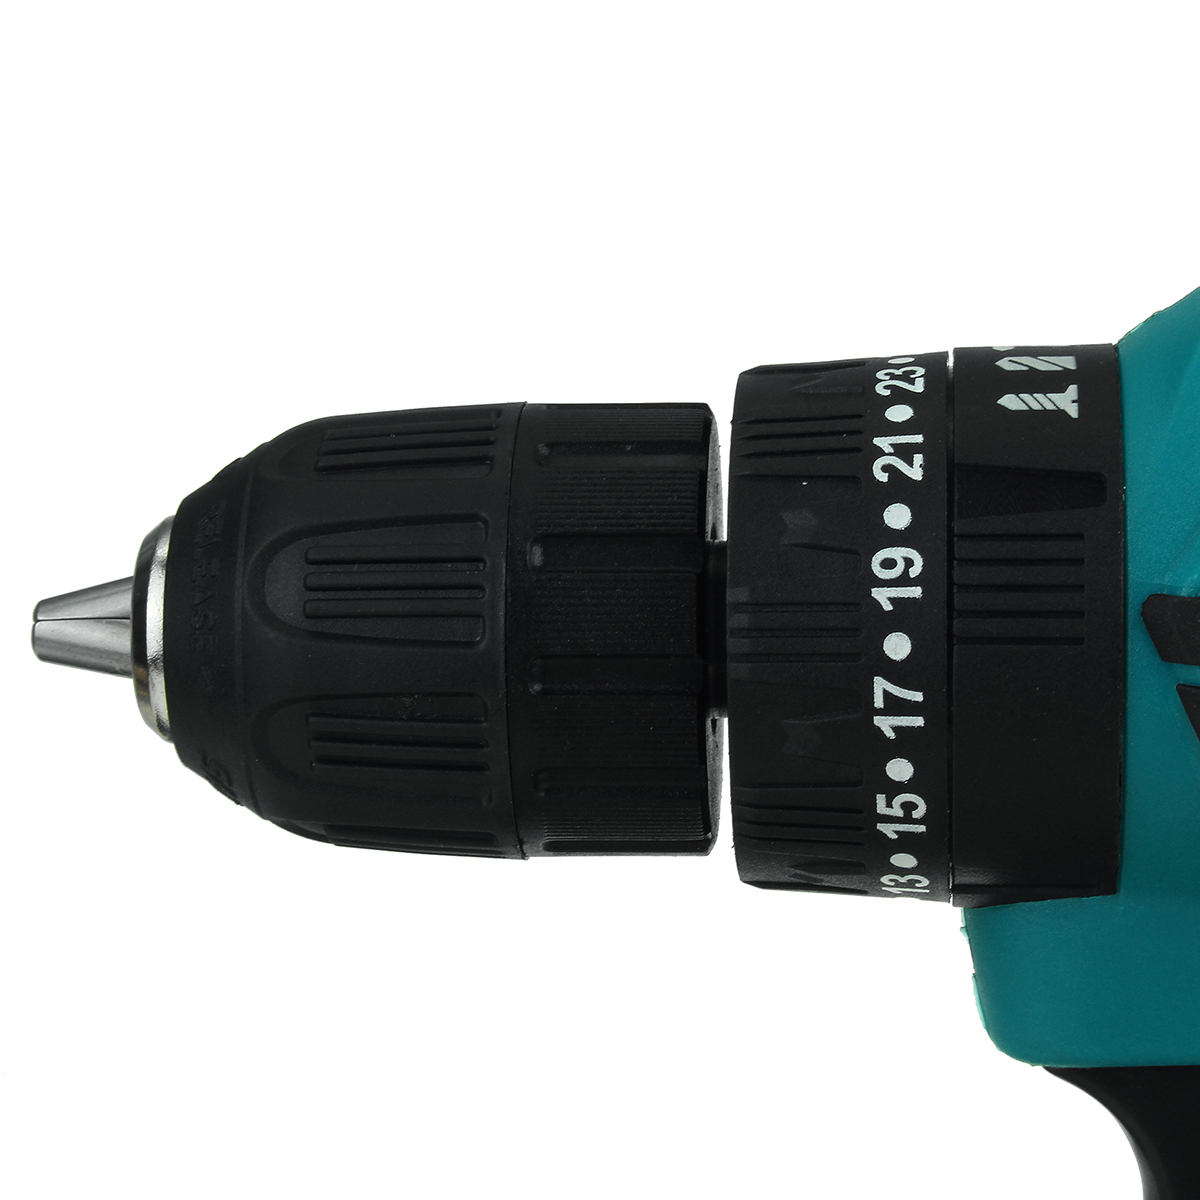 88VF-Cordless-Drill-3-IN-1-Electric-Screwdriver-Hammer-Impact-Drill-7500mAh-2-Speed-1787578-9